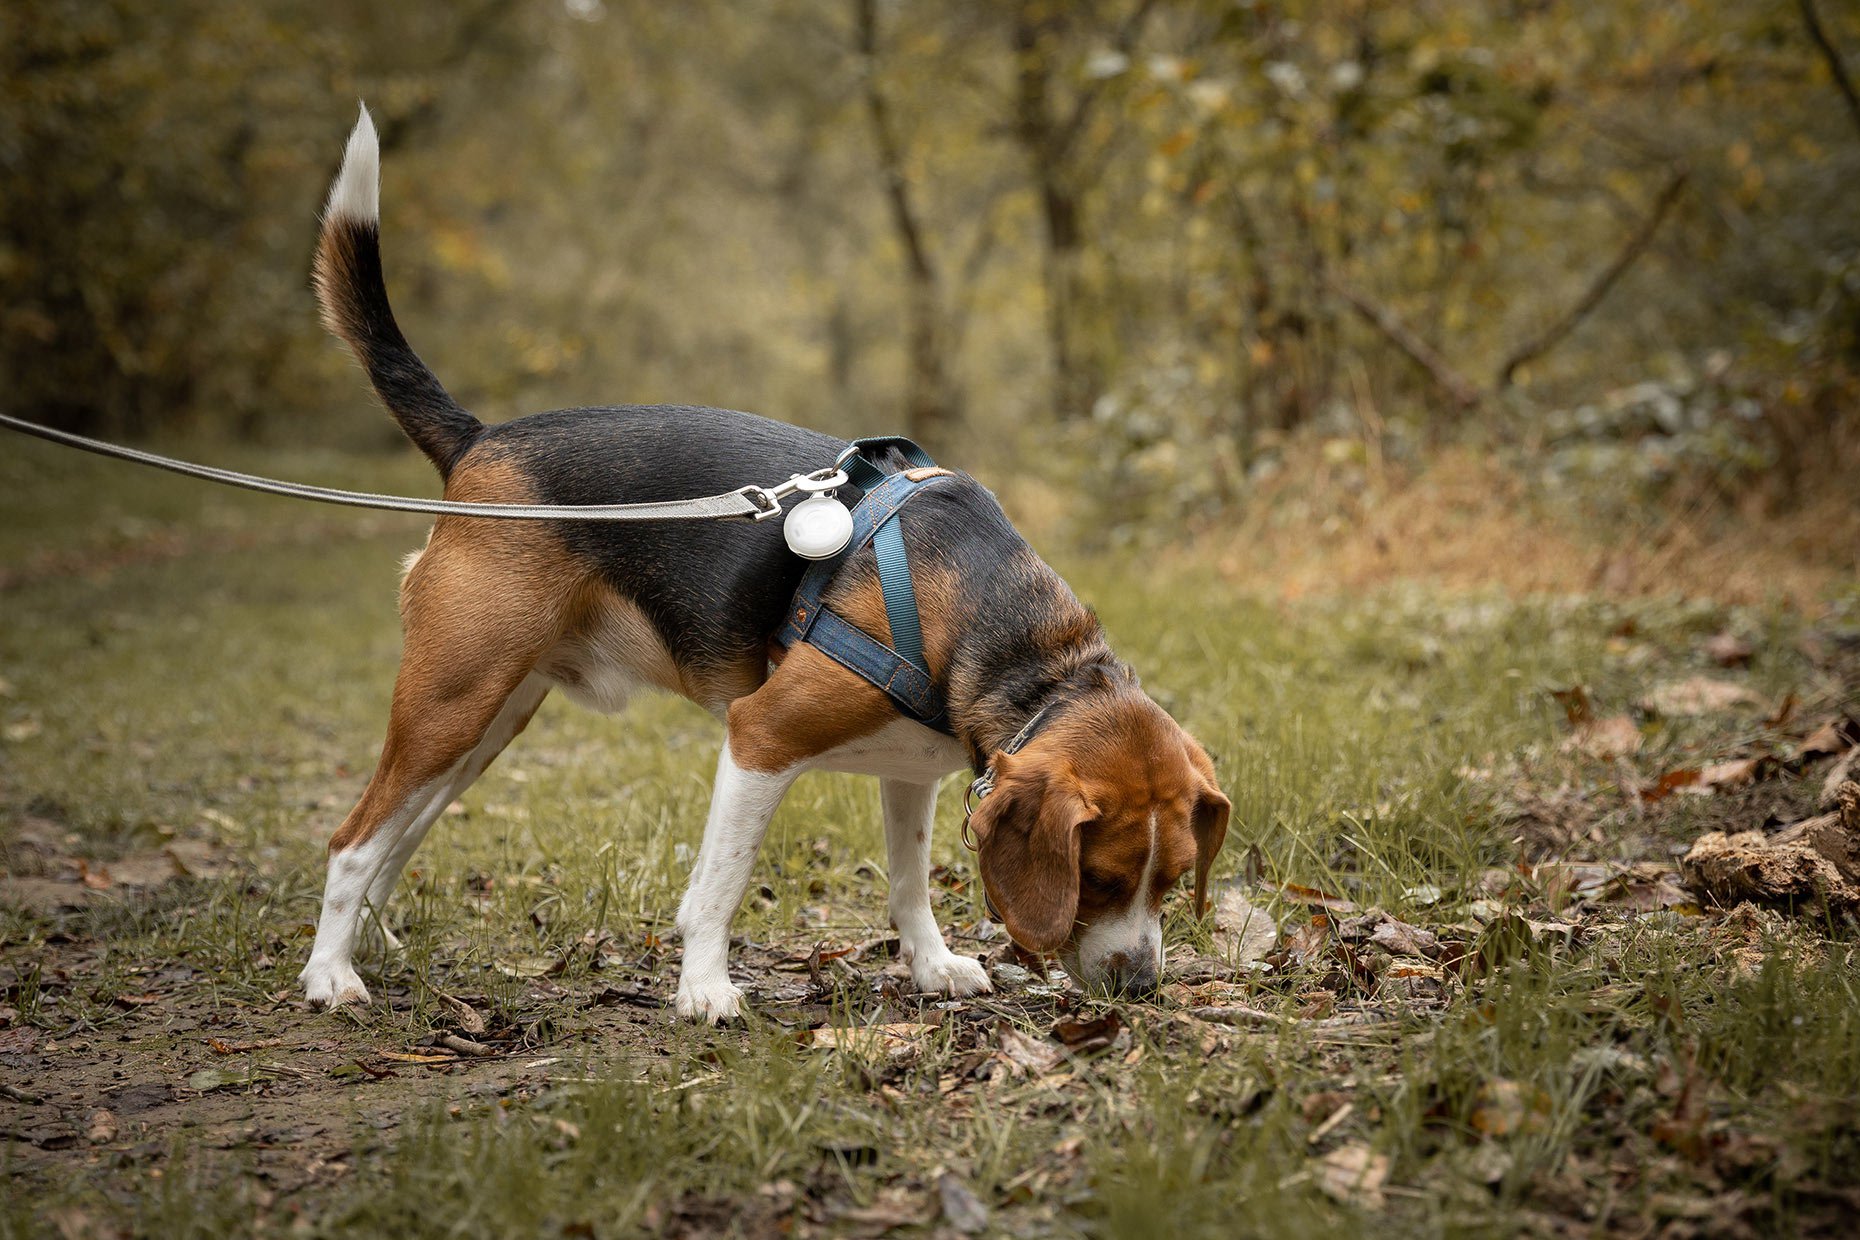 Beagle puppy sniffs the leaves